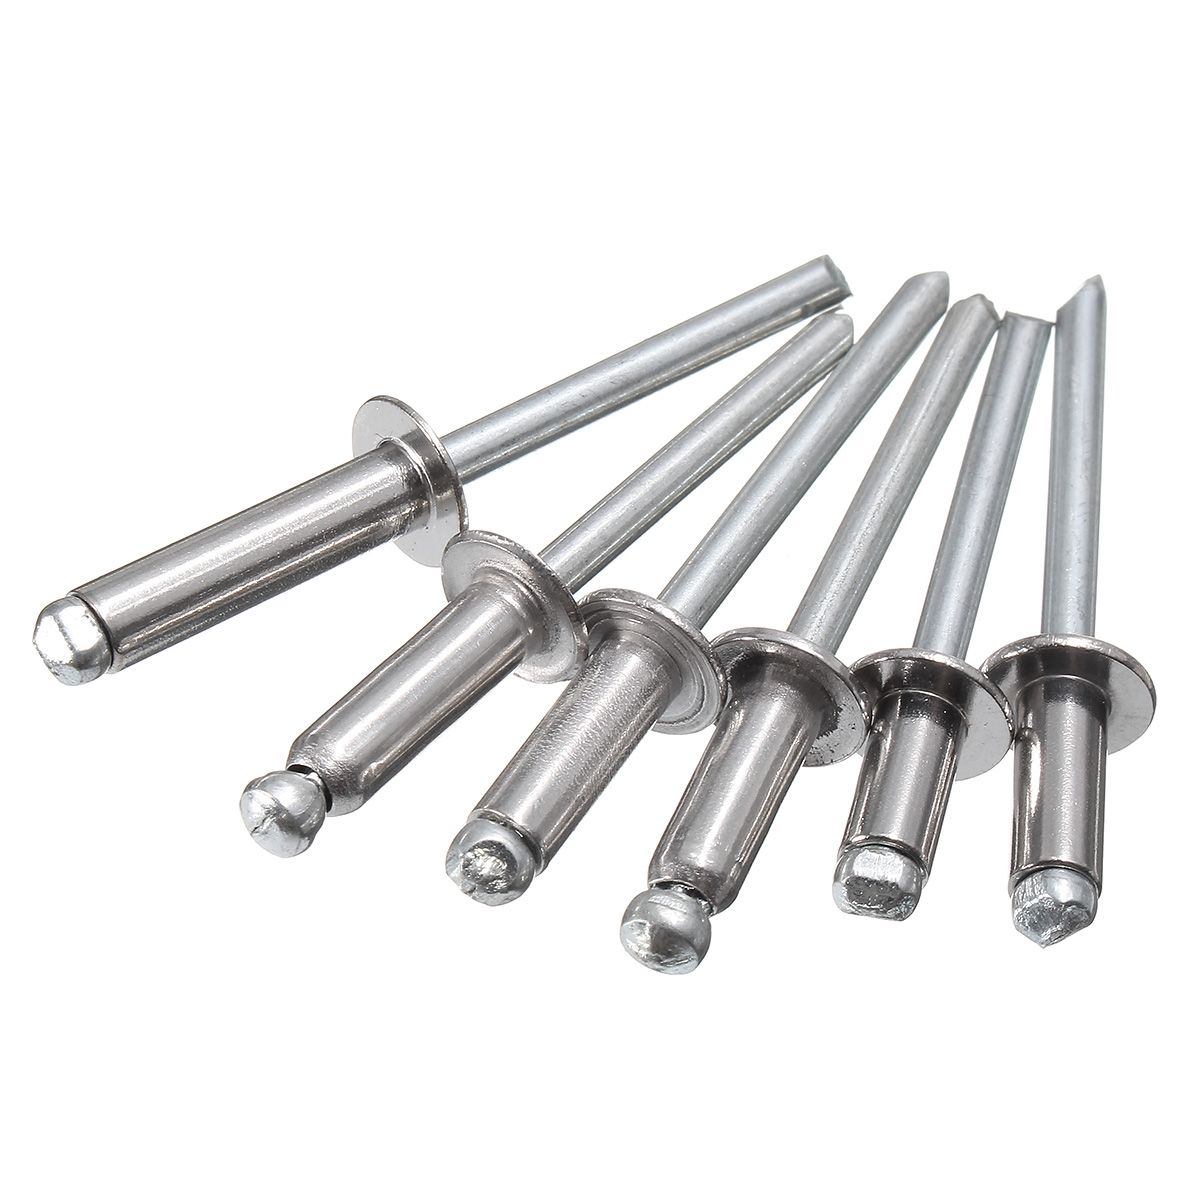 100Pcs-M5-Open-End-Blind-Rivets-Dome-Head-304-Stainless-Steel-with-Break-Pull-Mandrel-1154402